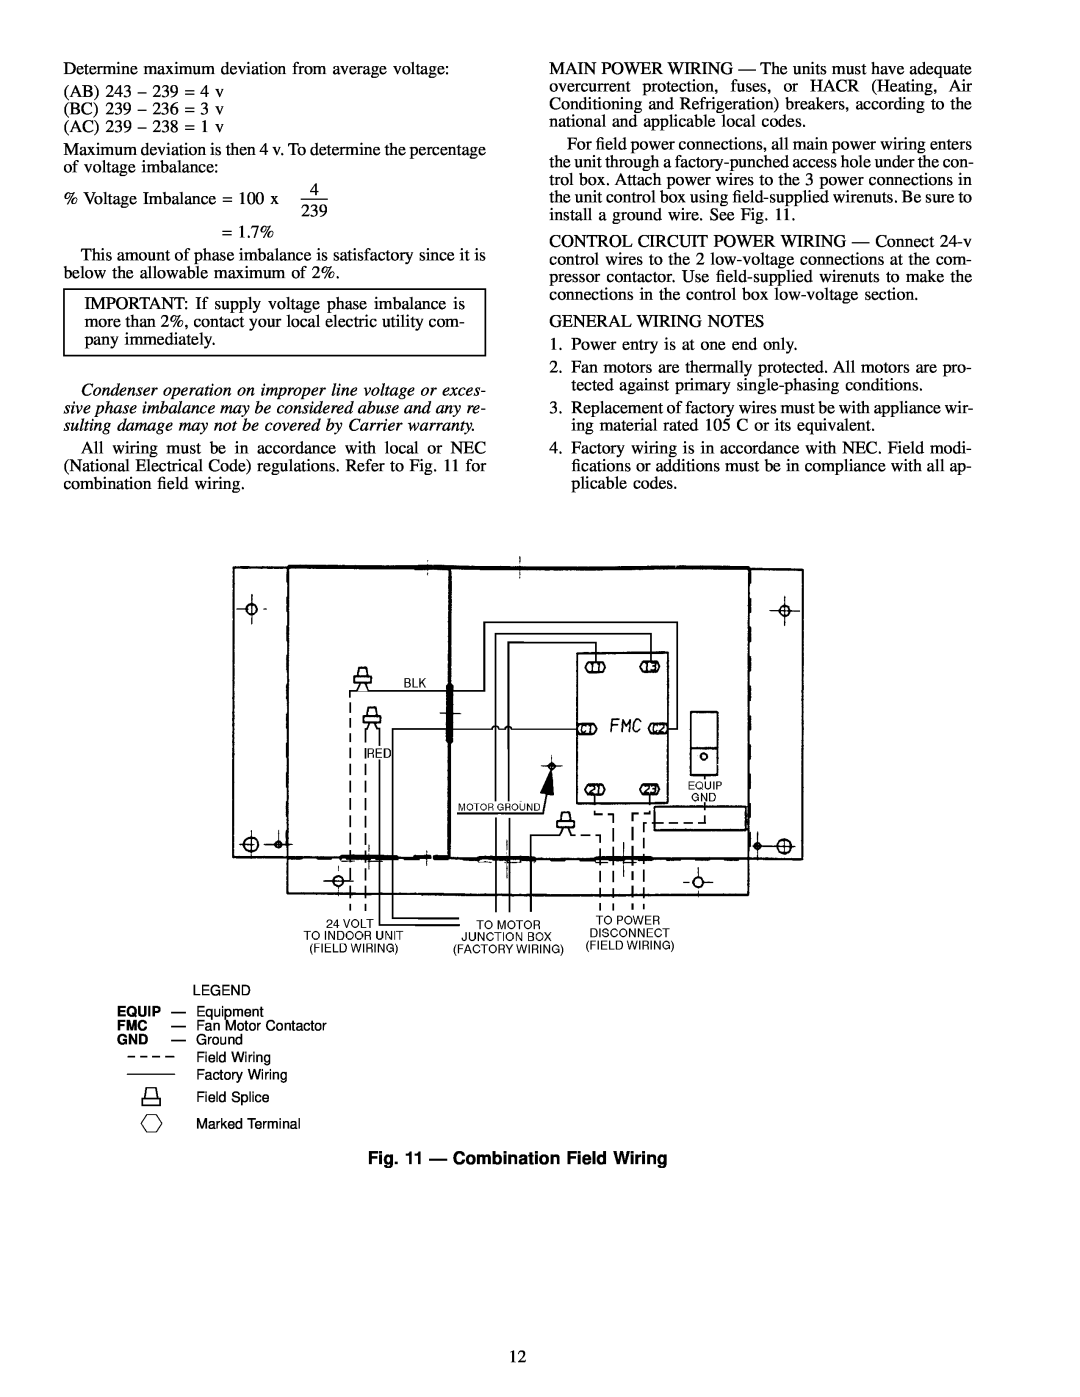 Carrier 09BY006-024 dimensions Ð Combination Field Wiring 